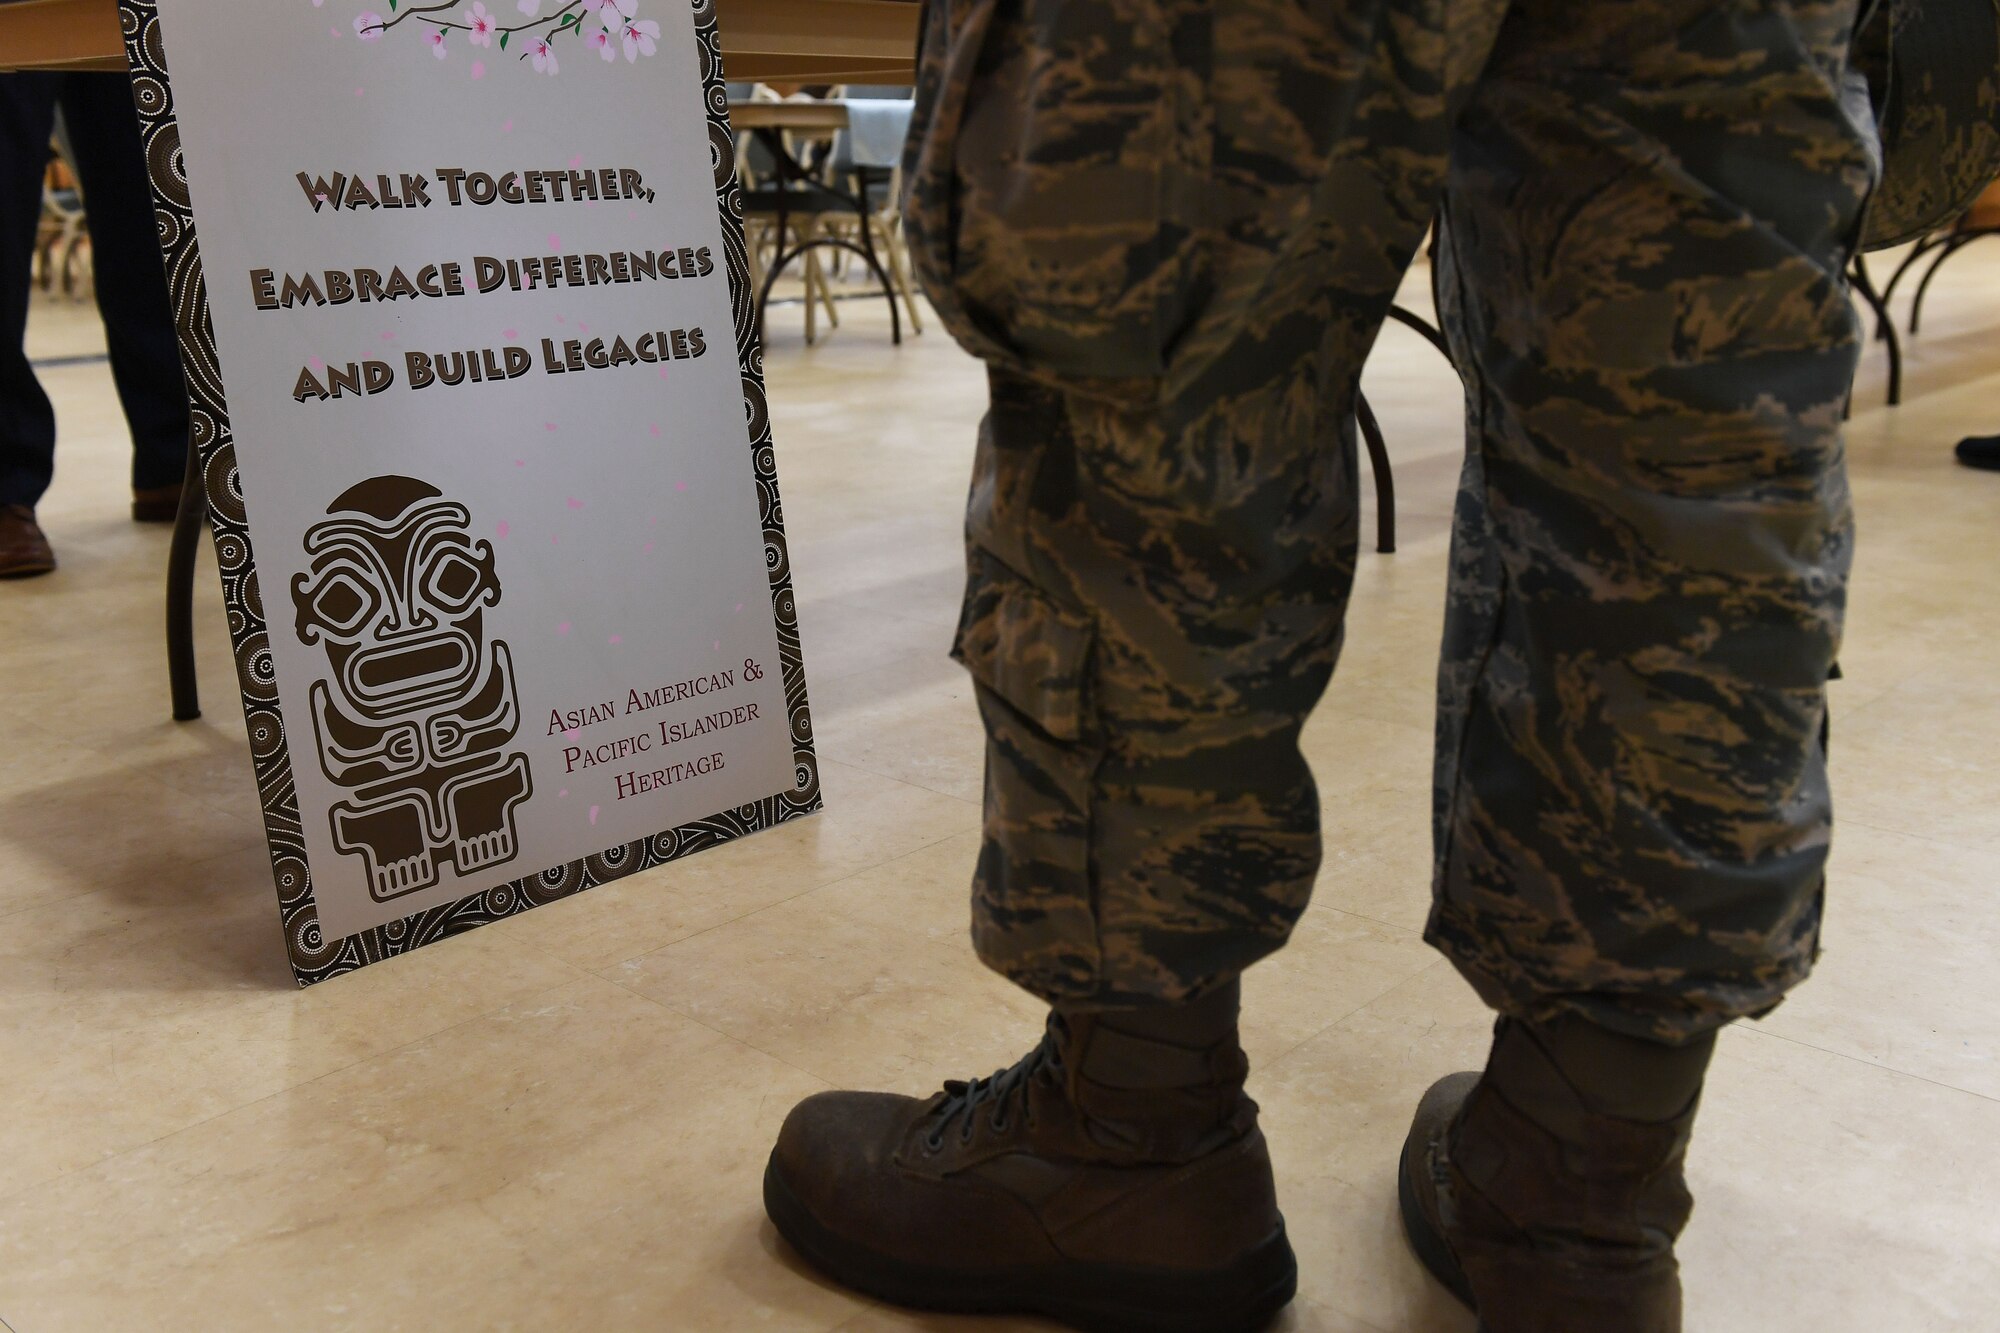 A person's feet stand in front of a sign on the ground and in front of a table.